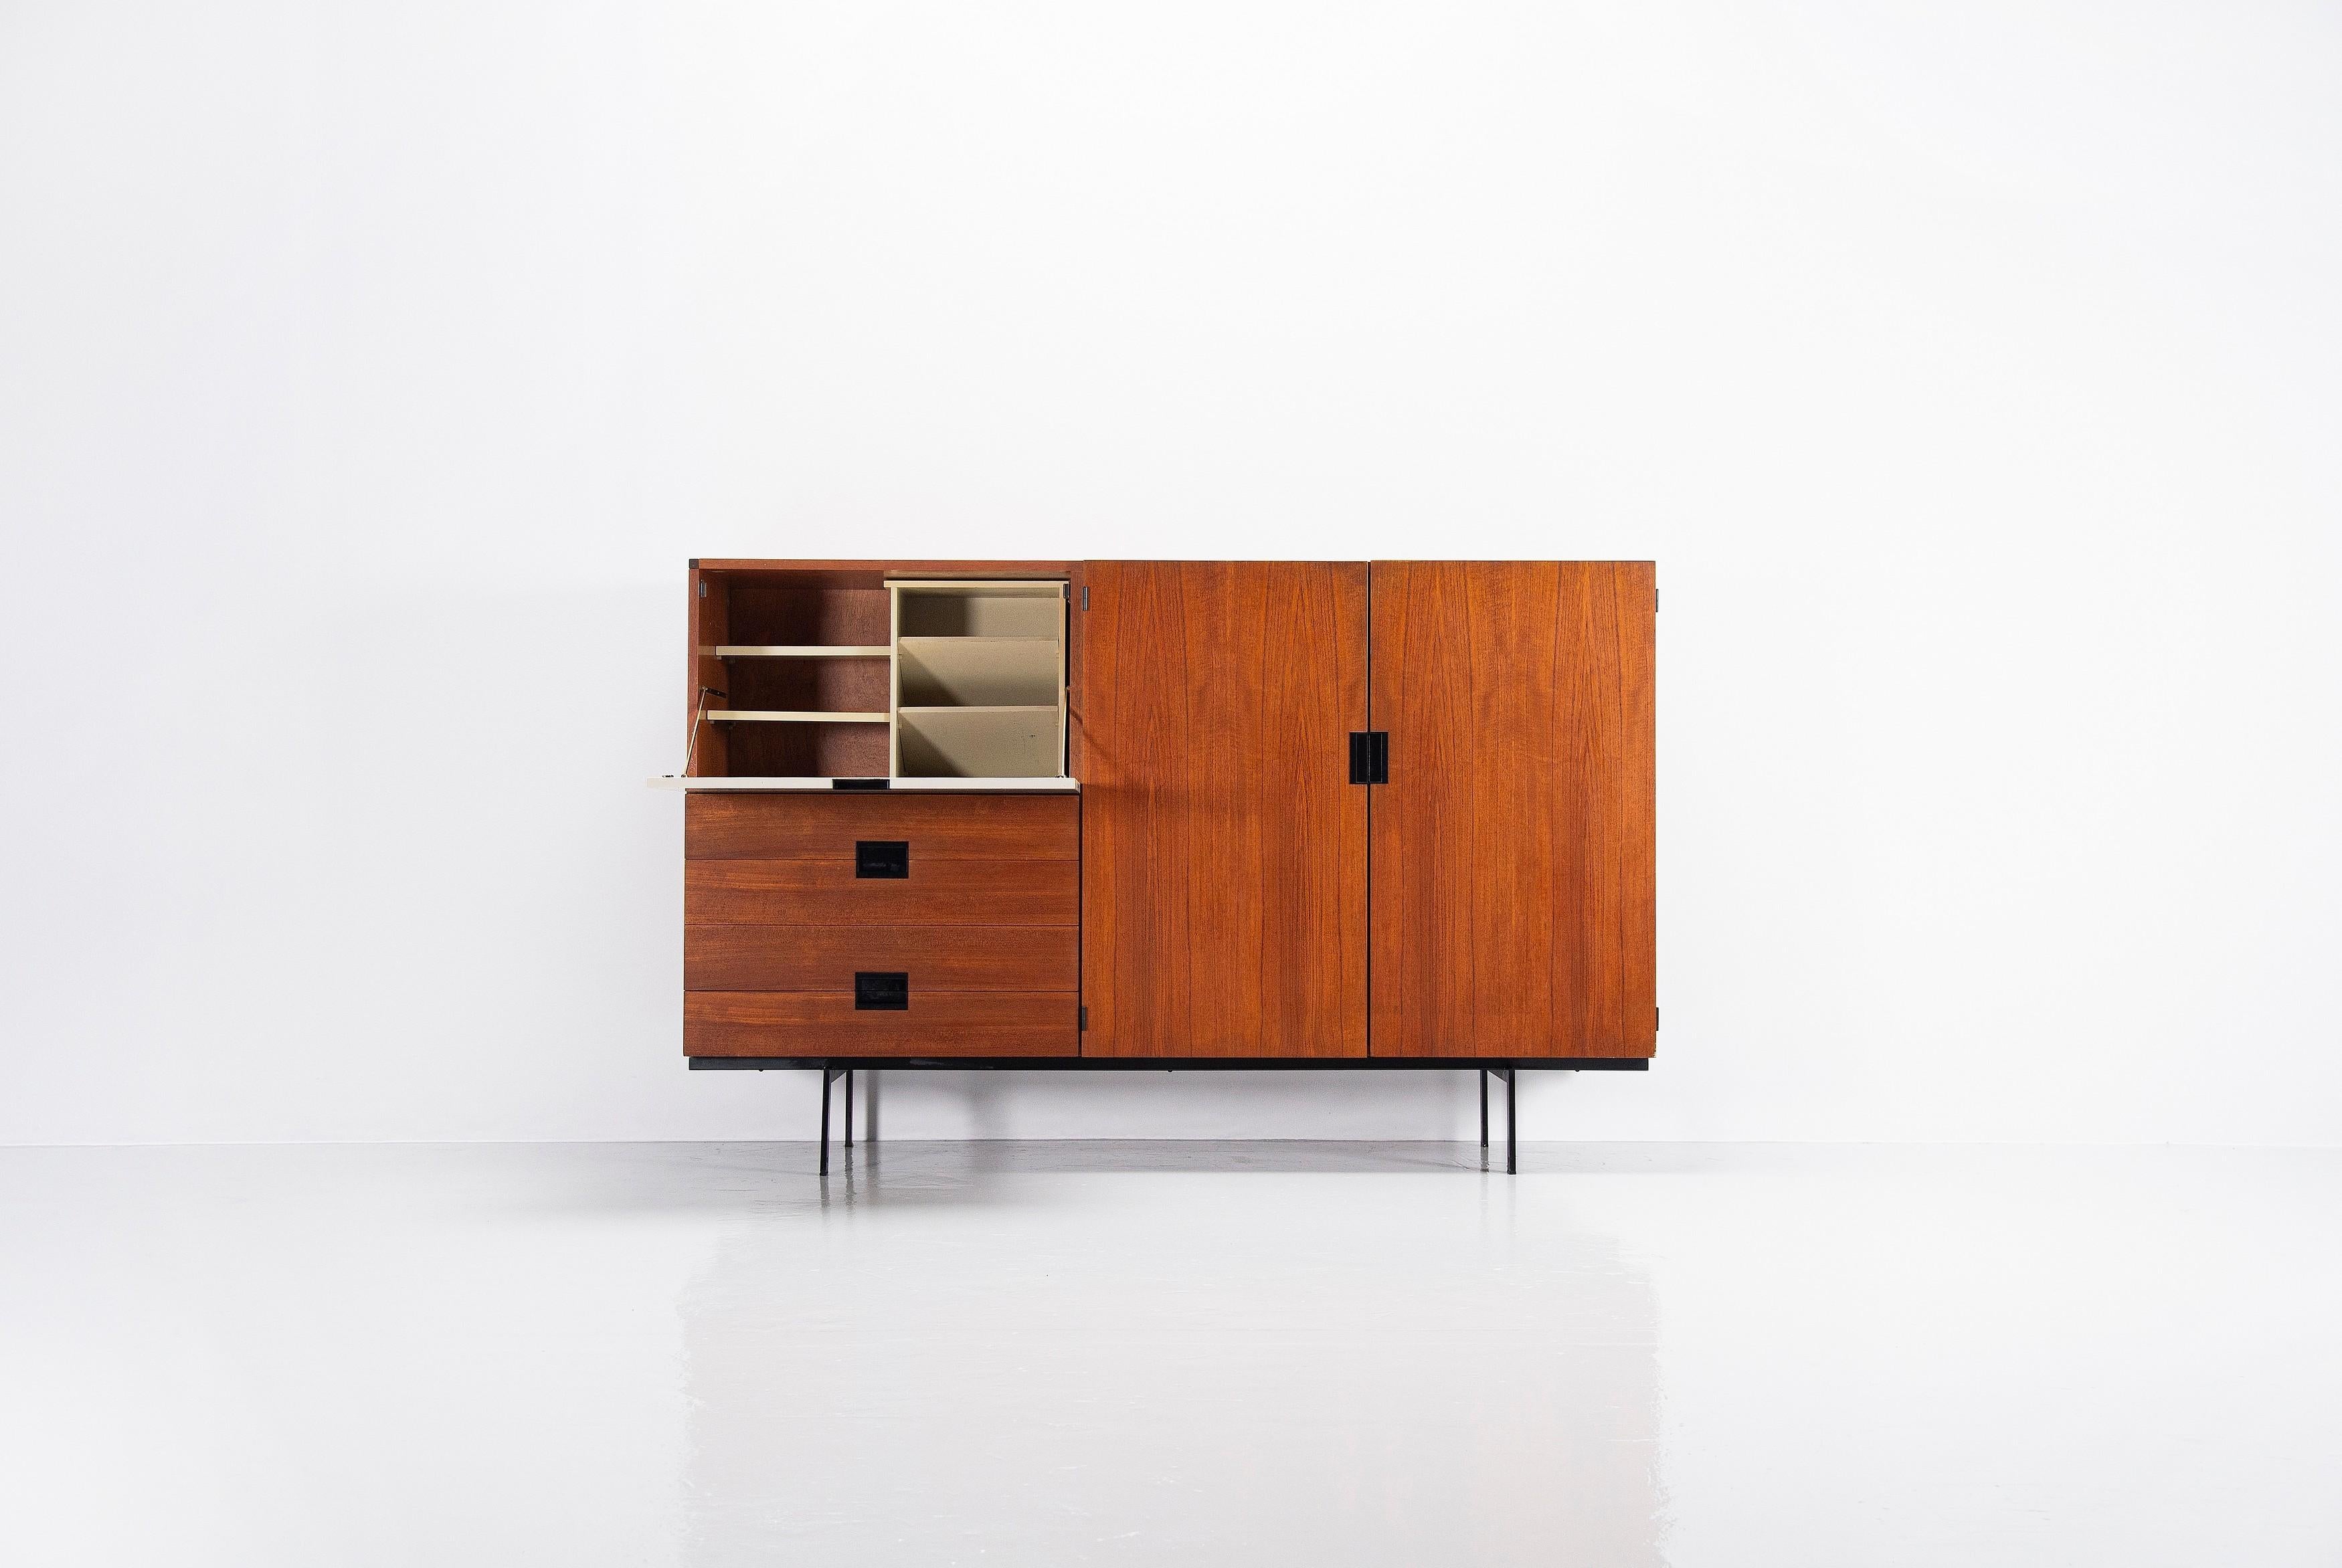 This is for a Minimalist cabinet model CU09 designed by Cees Braakman and manufactured by Pastoe UMS, Holland 1958. This high cabinet is made of teak wood and has a black painted metal frame. The handles are made of black plastic. The left folding